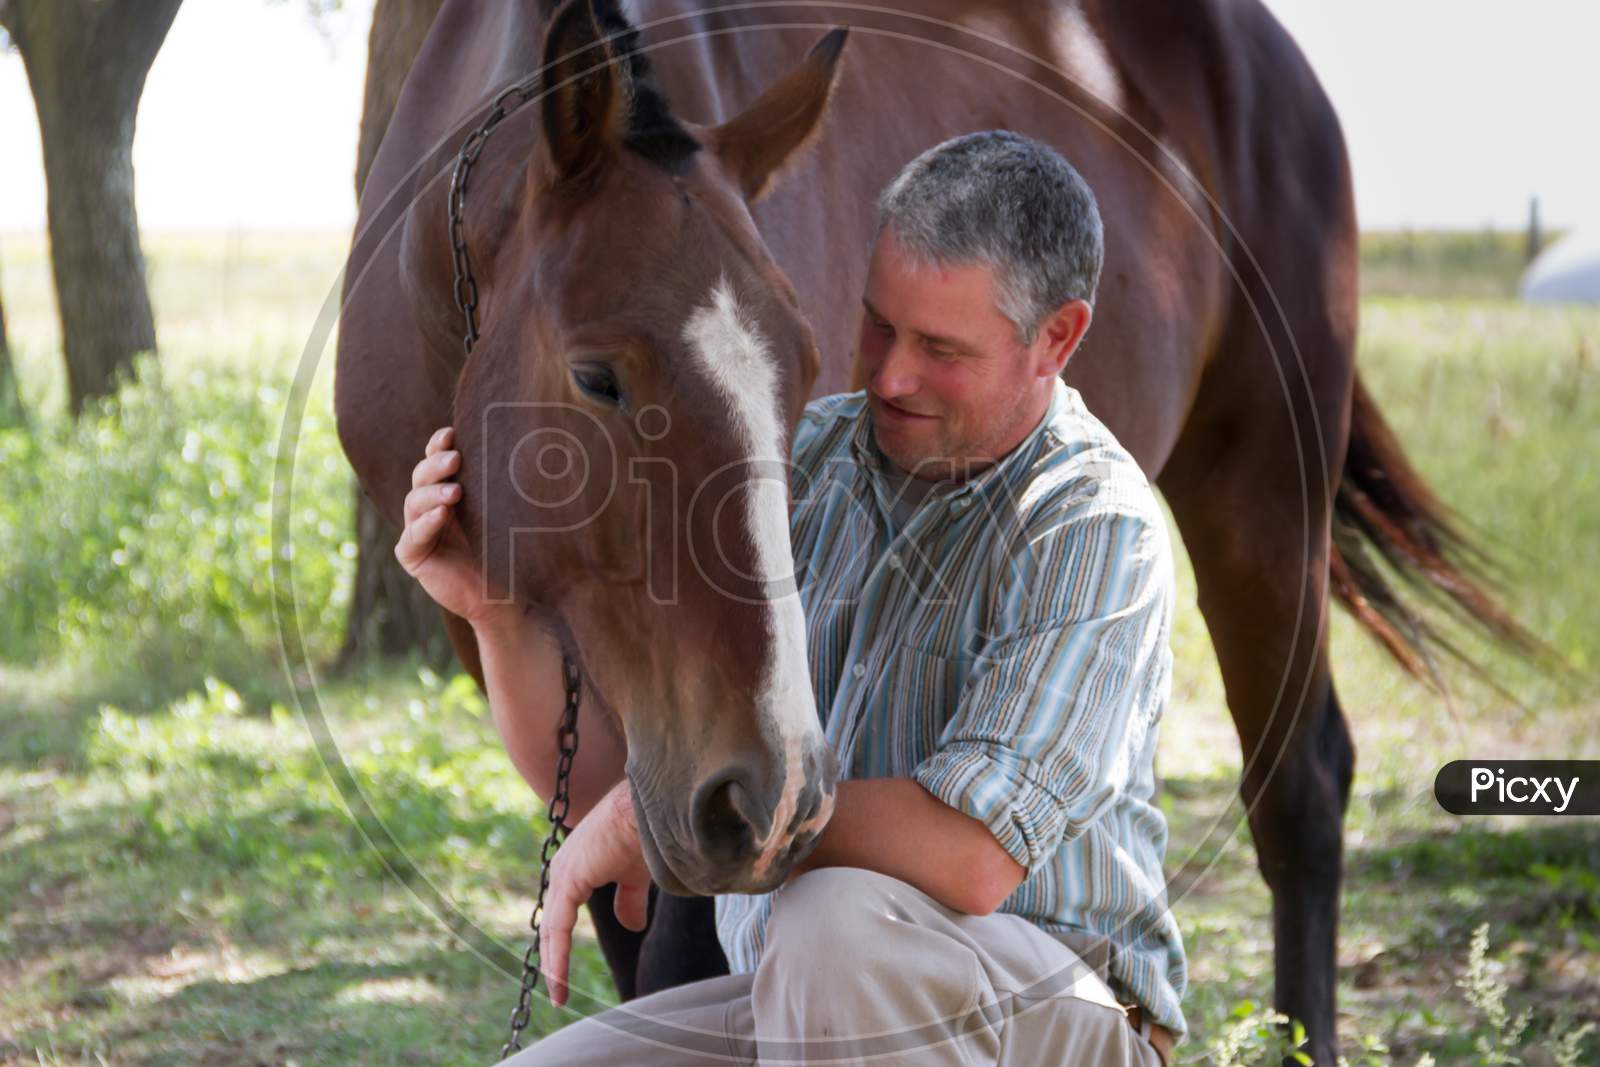 Smiling Man With His Horse In The Argentine Countryside